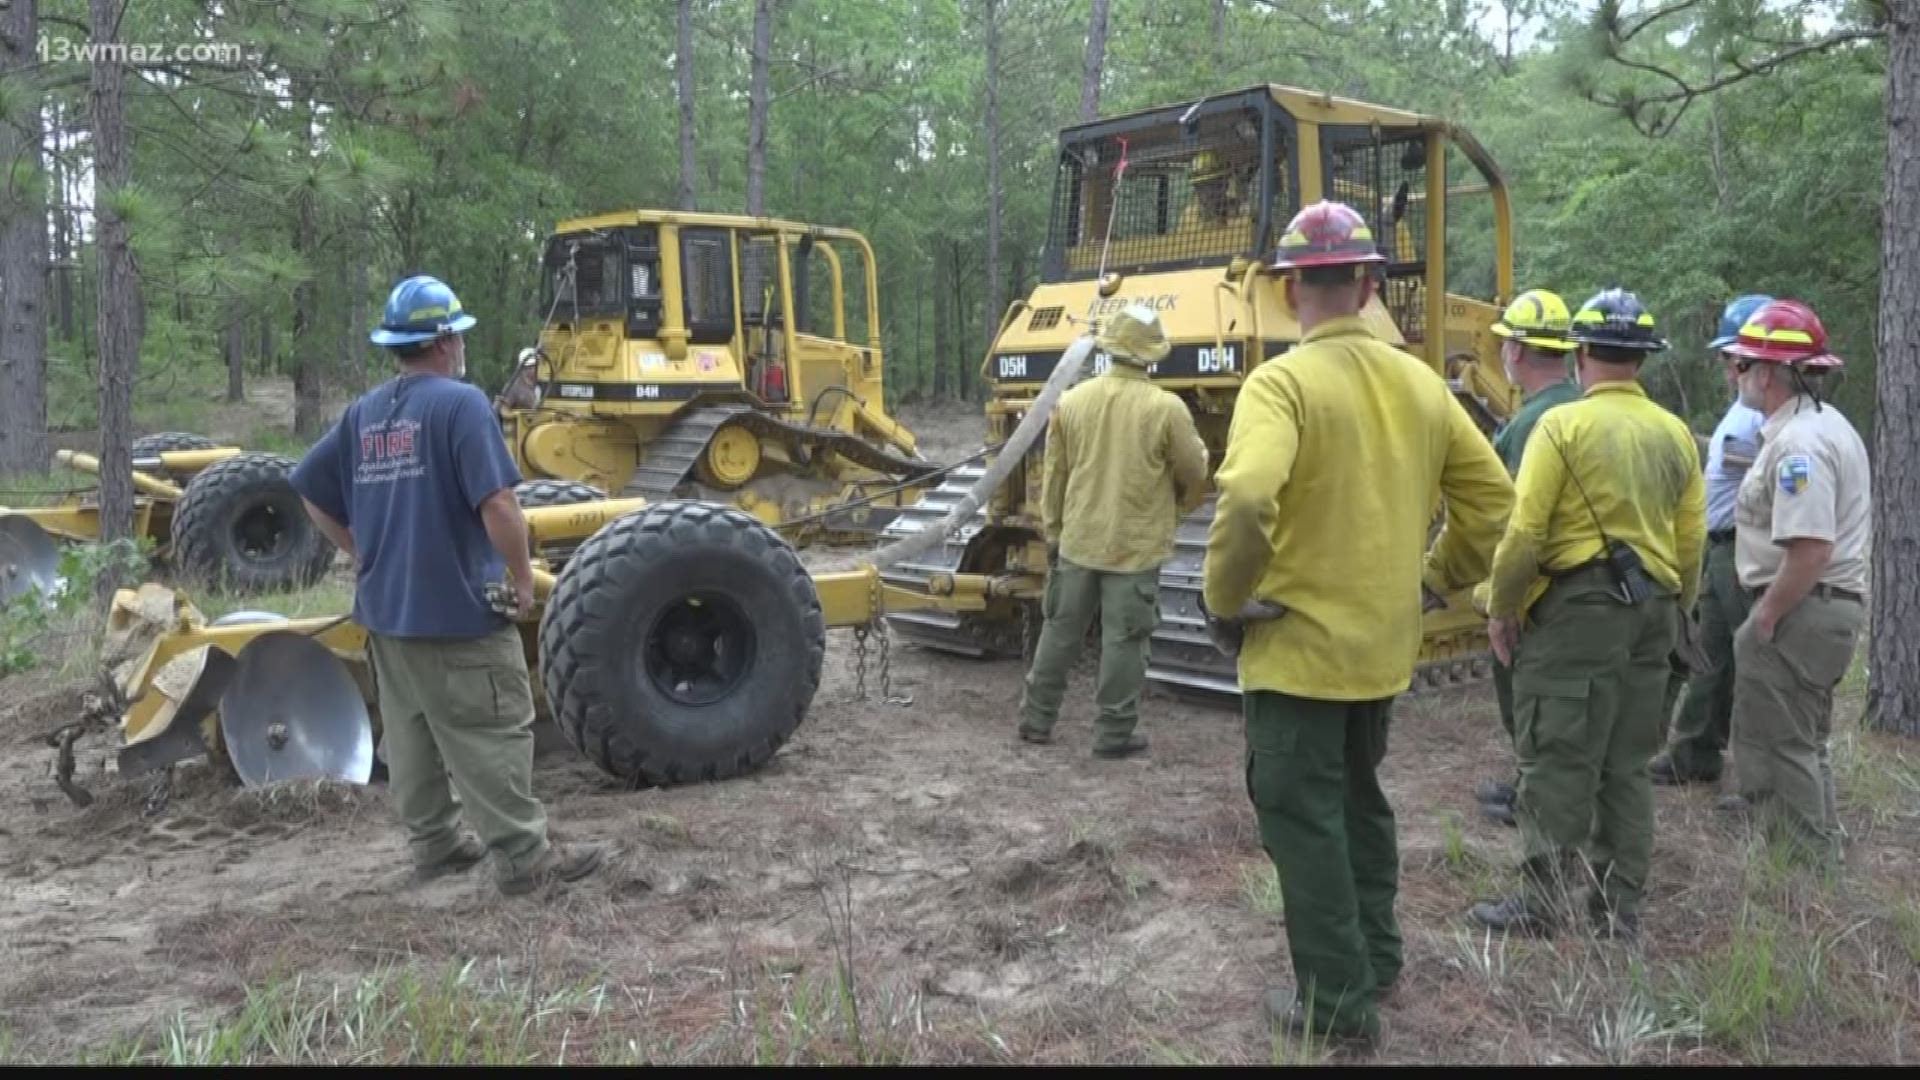 The summer months can bring dry air and grass or forest fires in the south, but the Georgia Forestry Commission is spending the next few days training firefighters how to use heavy equipment to extinguish them.